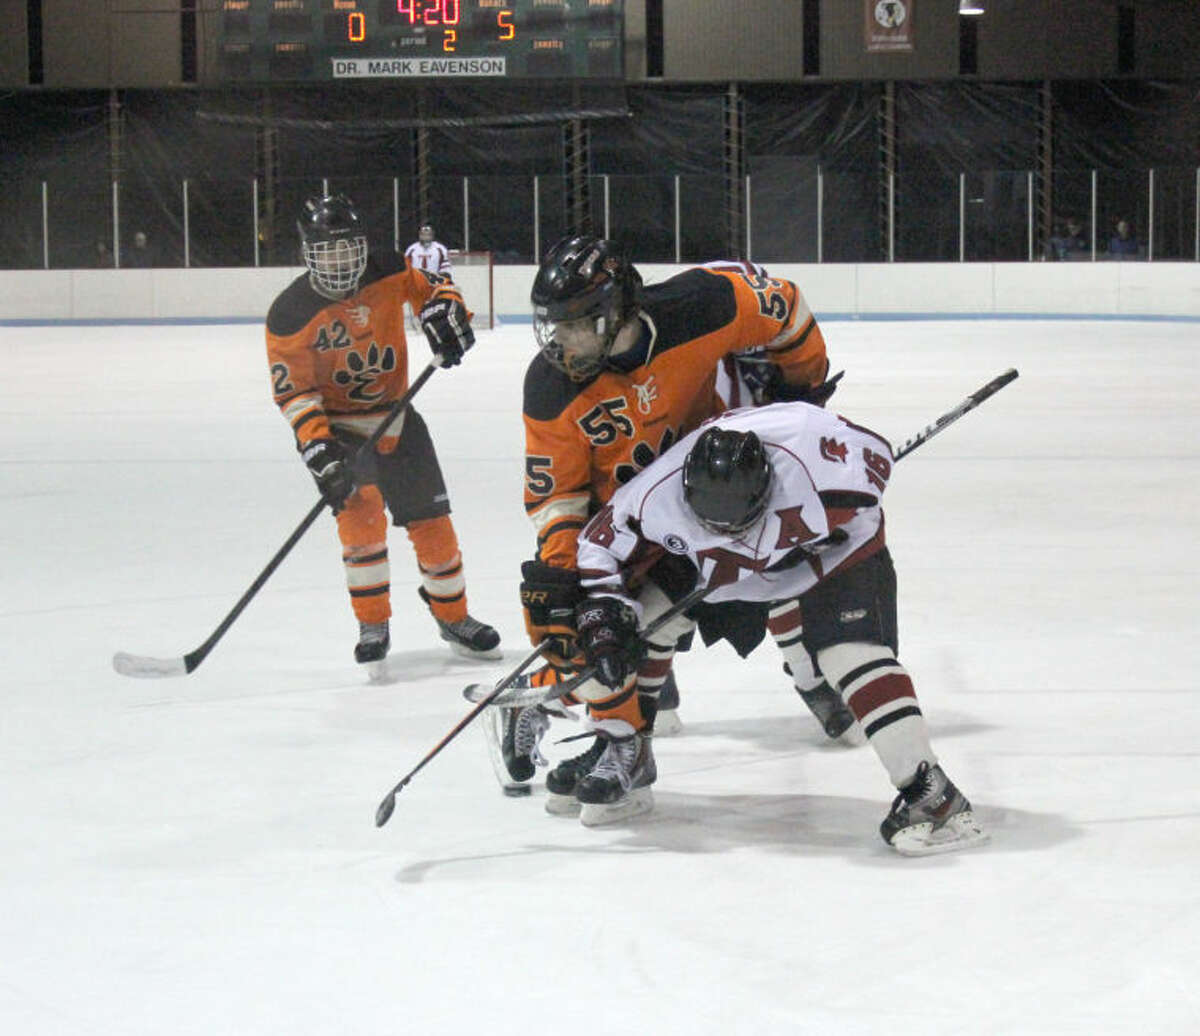 Edwardsville’s Shaun Raftery (No. 55) batlles for a loose puck on Thursday in Granite City.